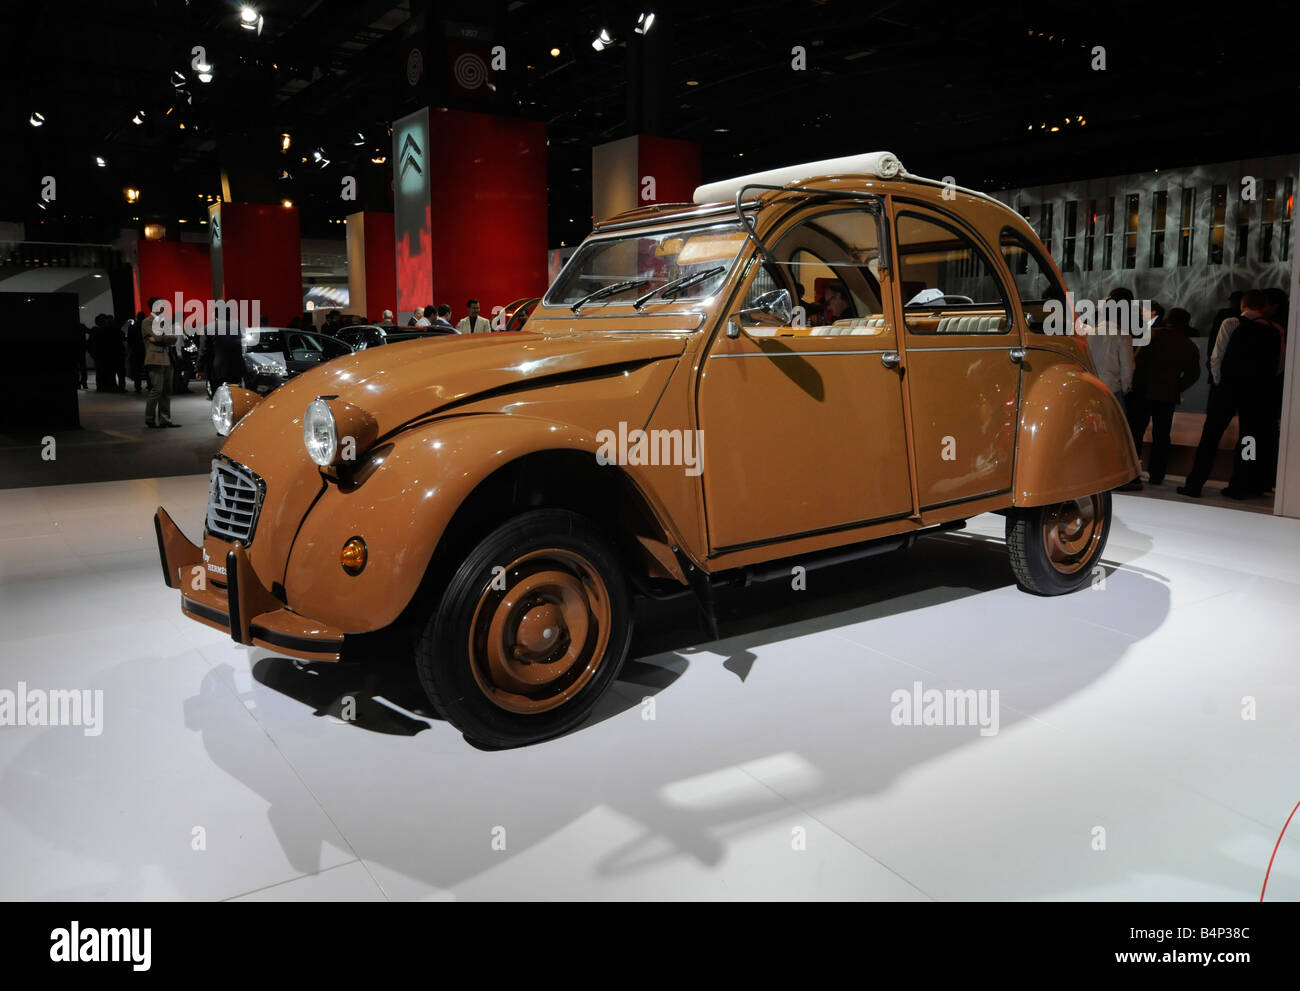 The legendary 2CV (deux chevaux) car from French automaker Peugeot, on display during the international motor show held in Paris Stock Photo